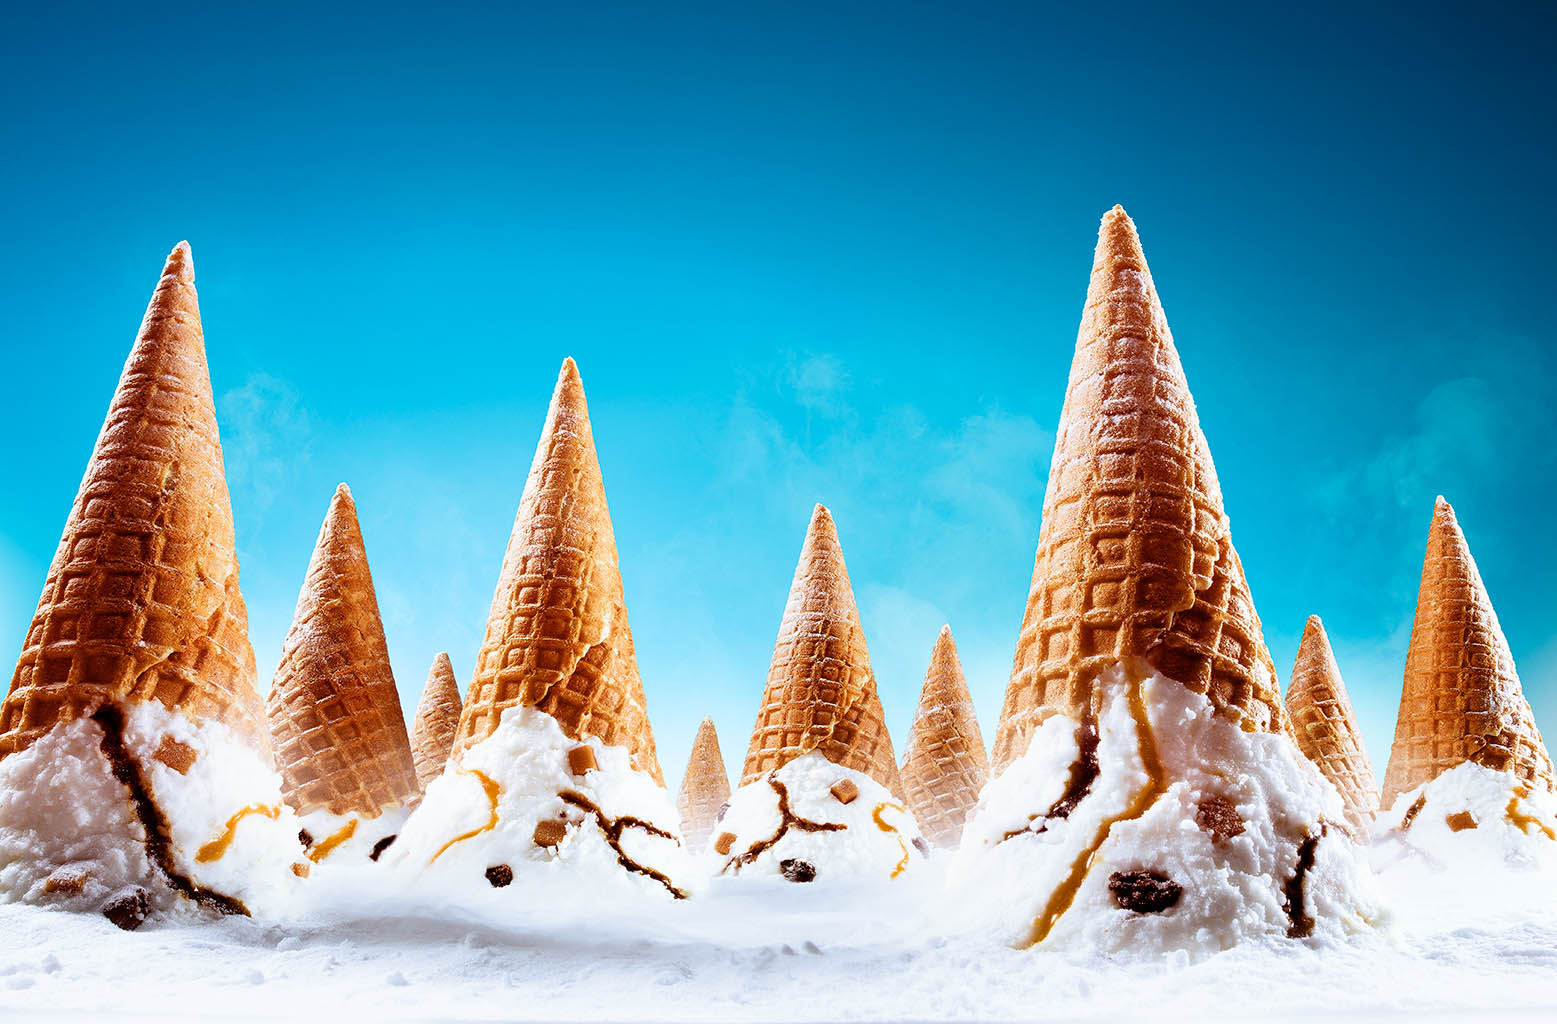 Food Photography of Cornetto ice cream by Packshot Factory